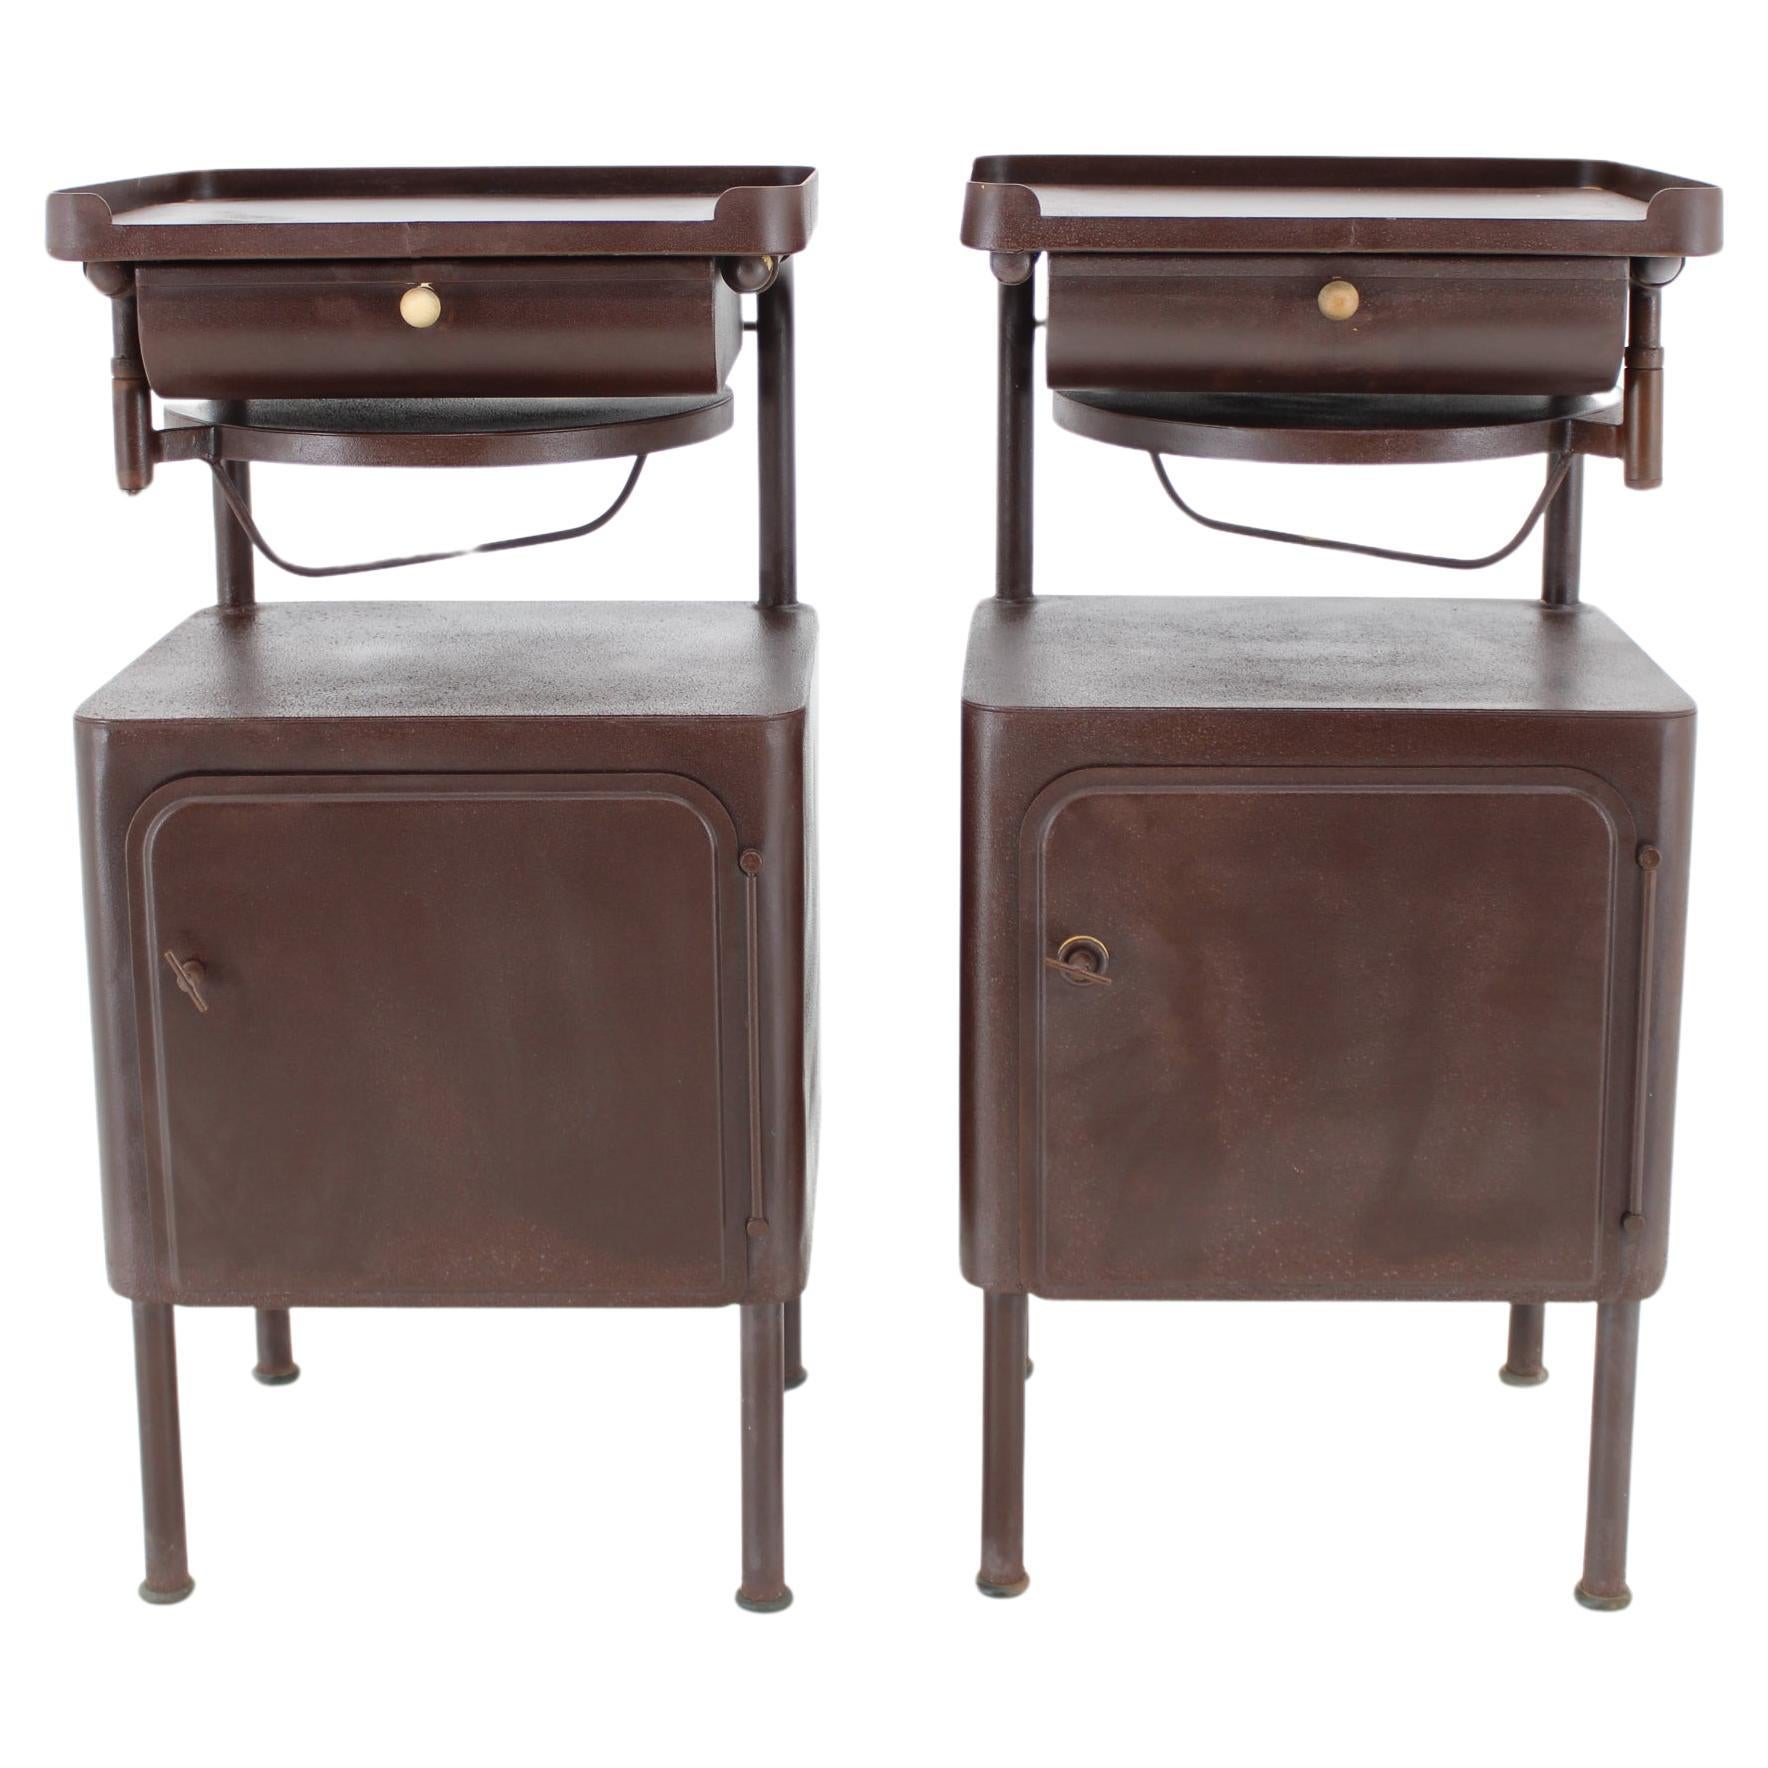 1940s Pair of Industrial Nightstands with Pull Out Table, Czechoslovakia